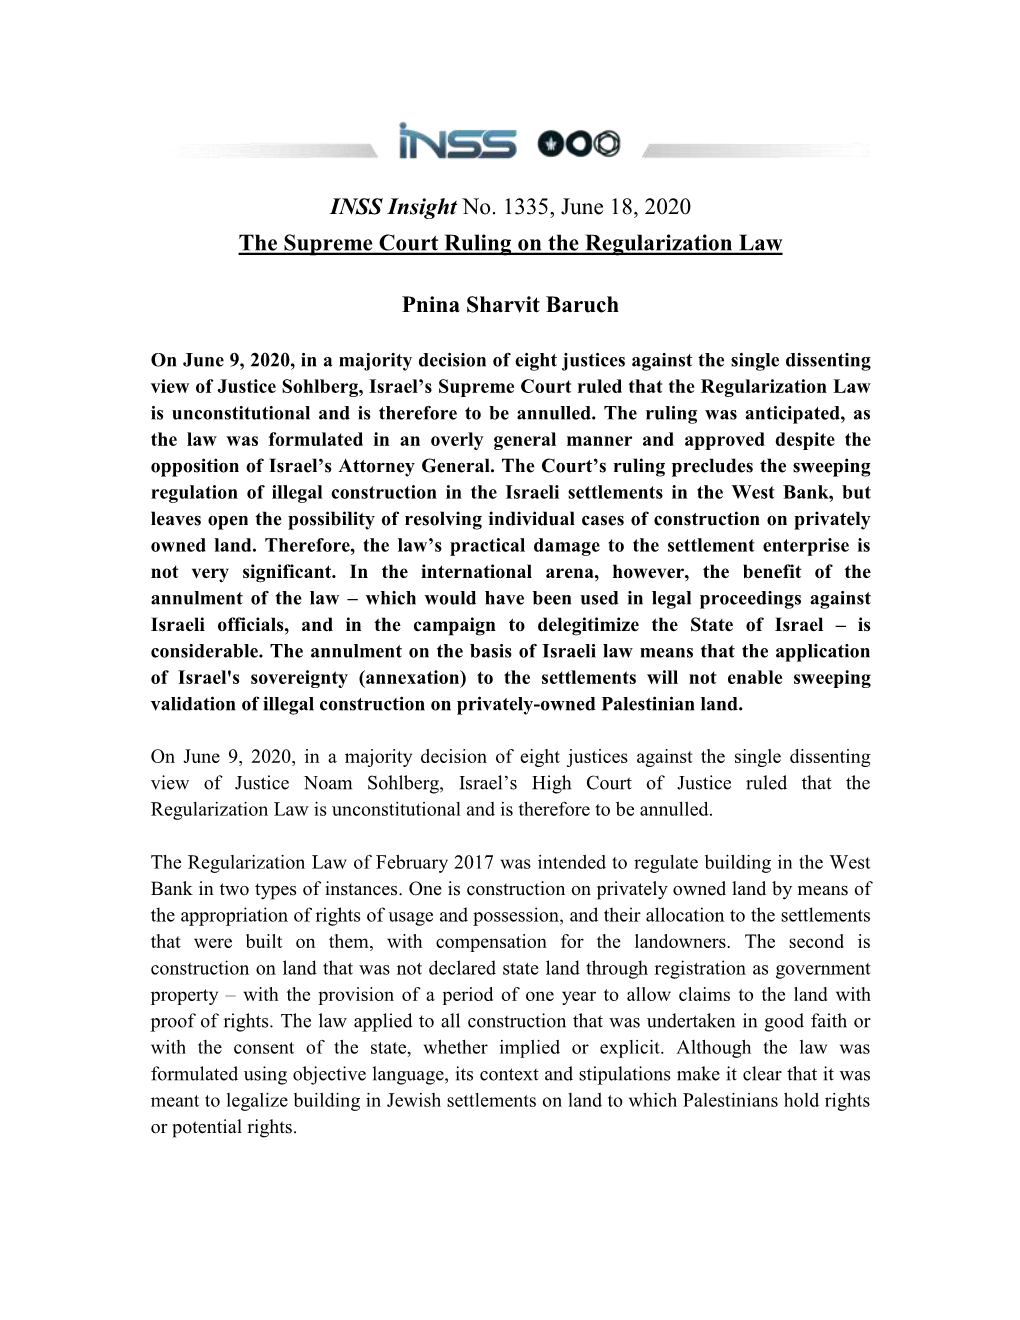 INSS Insight No. 1335, June 18, 2020 the Supreme Court Ruling on the Regularization Law